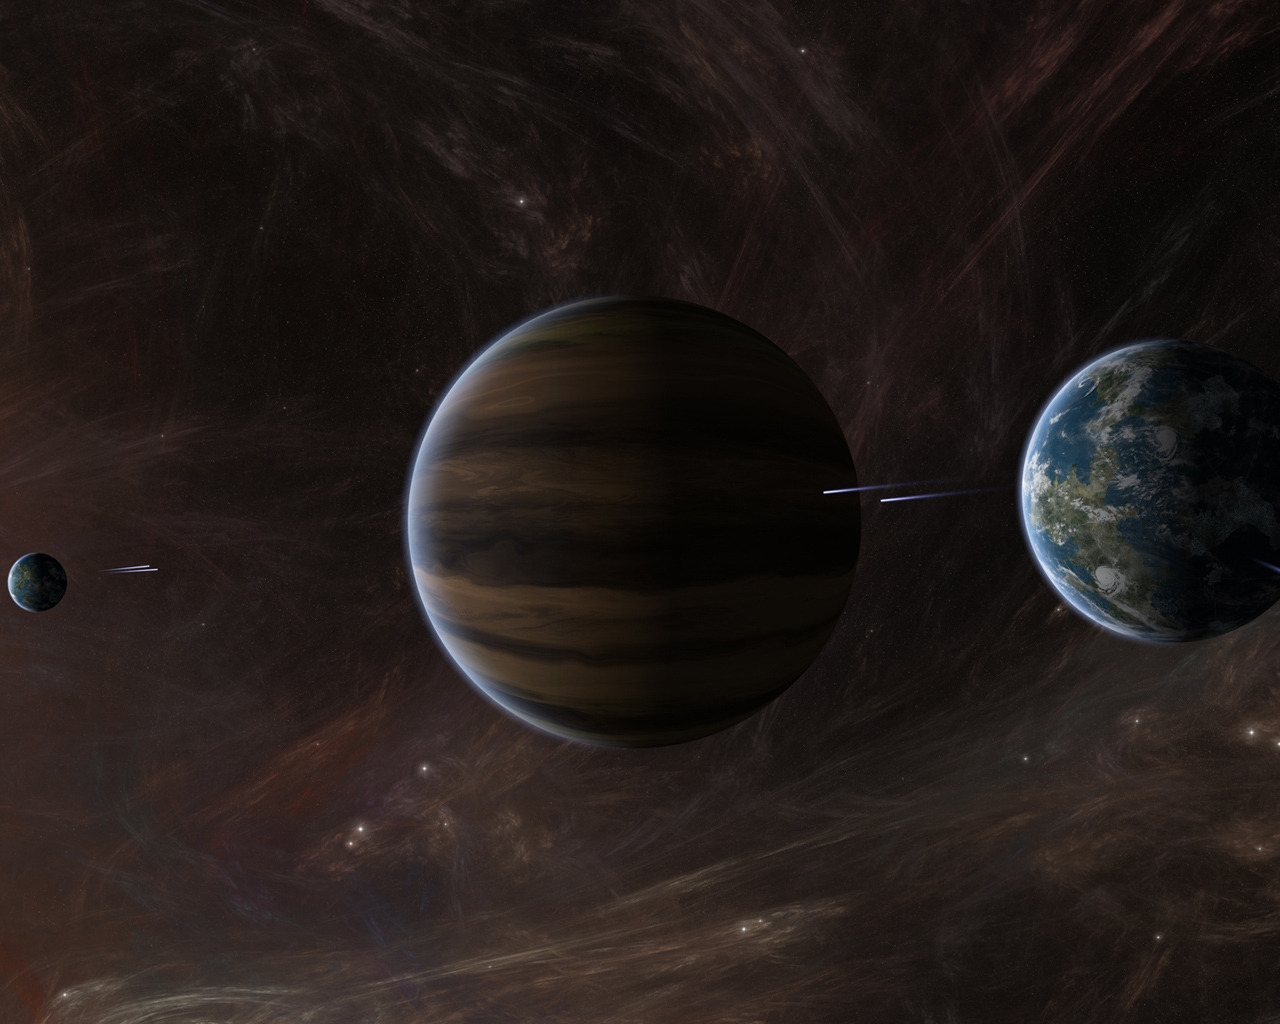 Space Planets Activity for 1280 x 1024 resolution